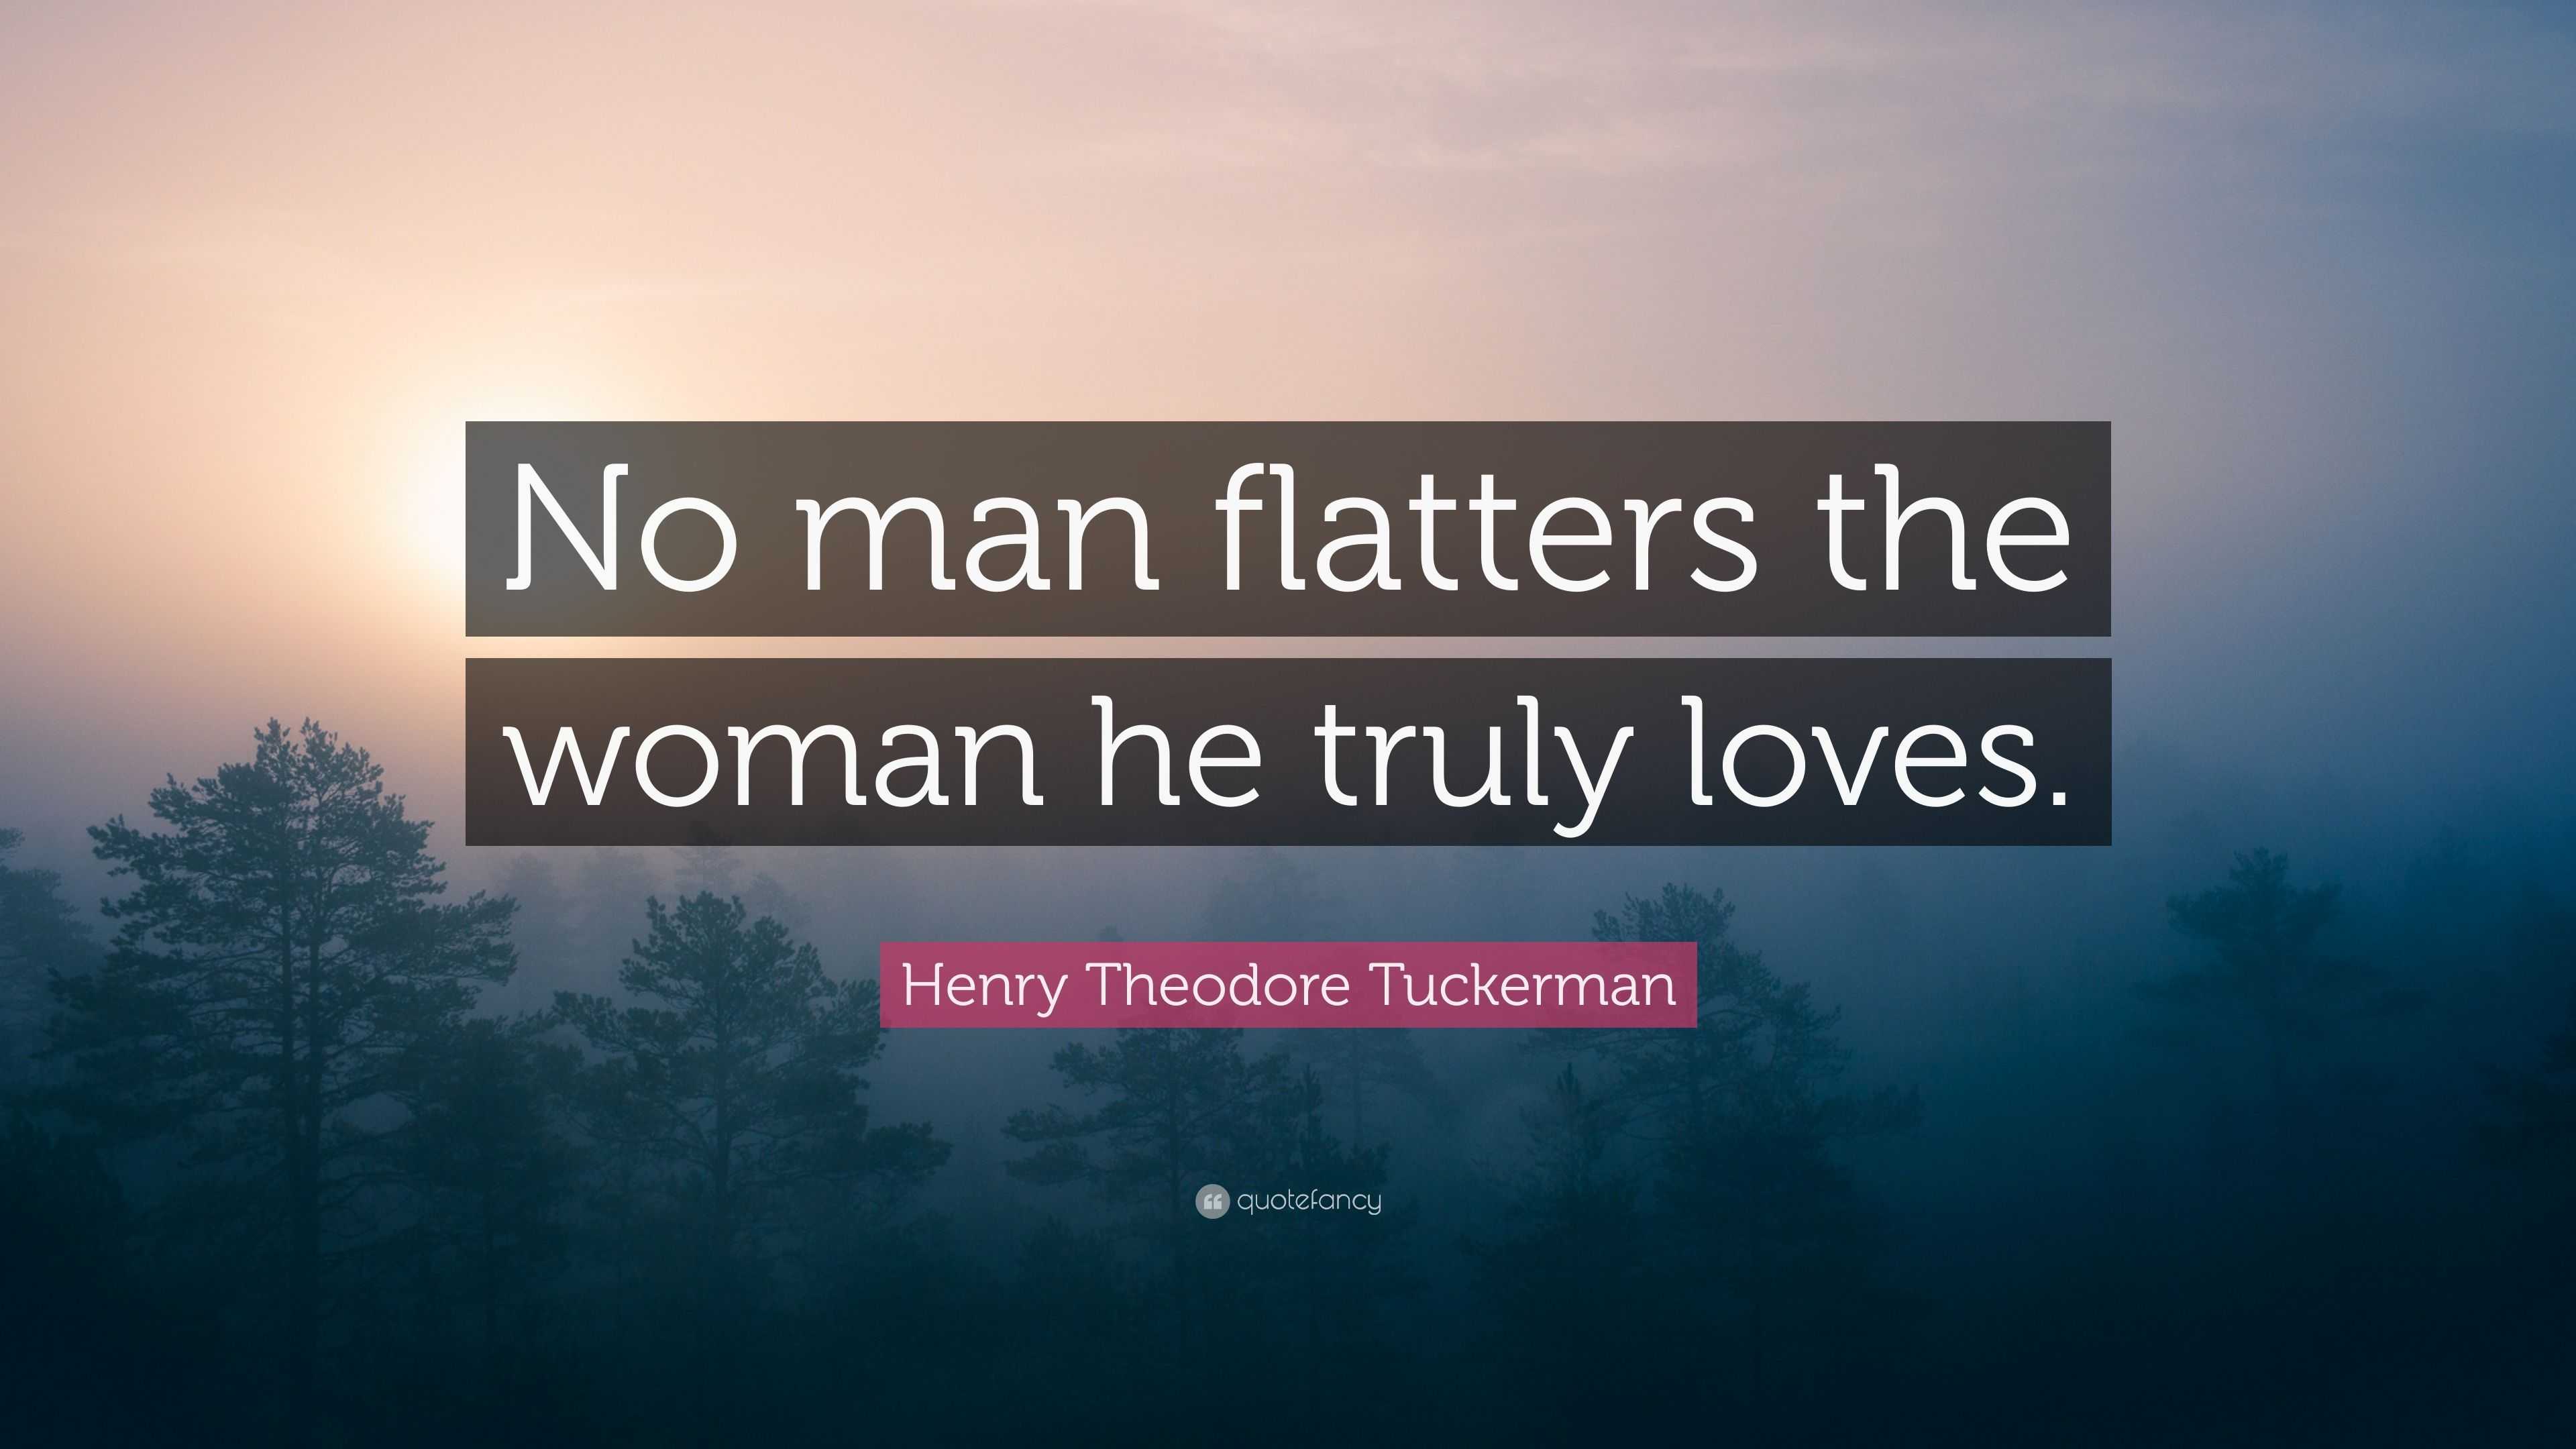 Henry Theodore Tuckerman Quote “No man flatters the woman he truly loves ”